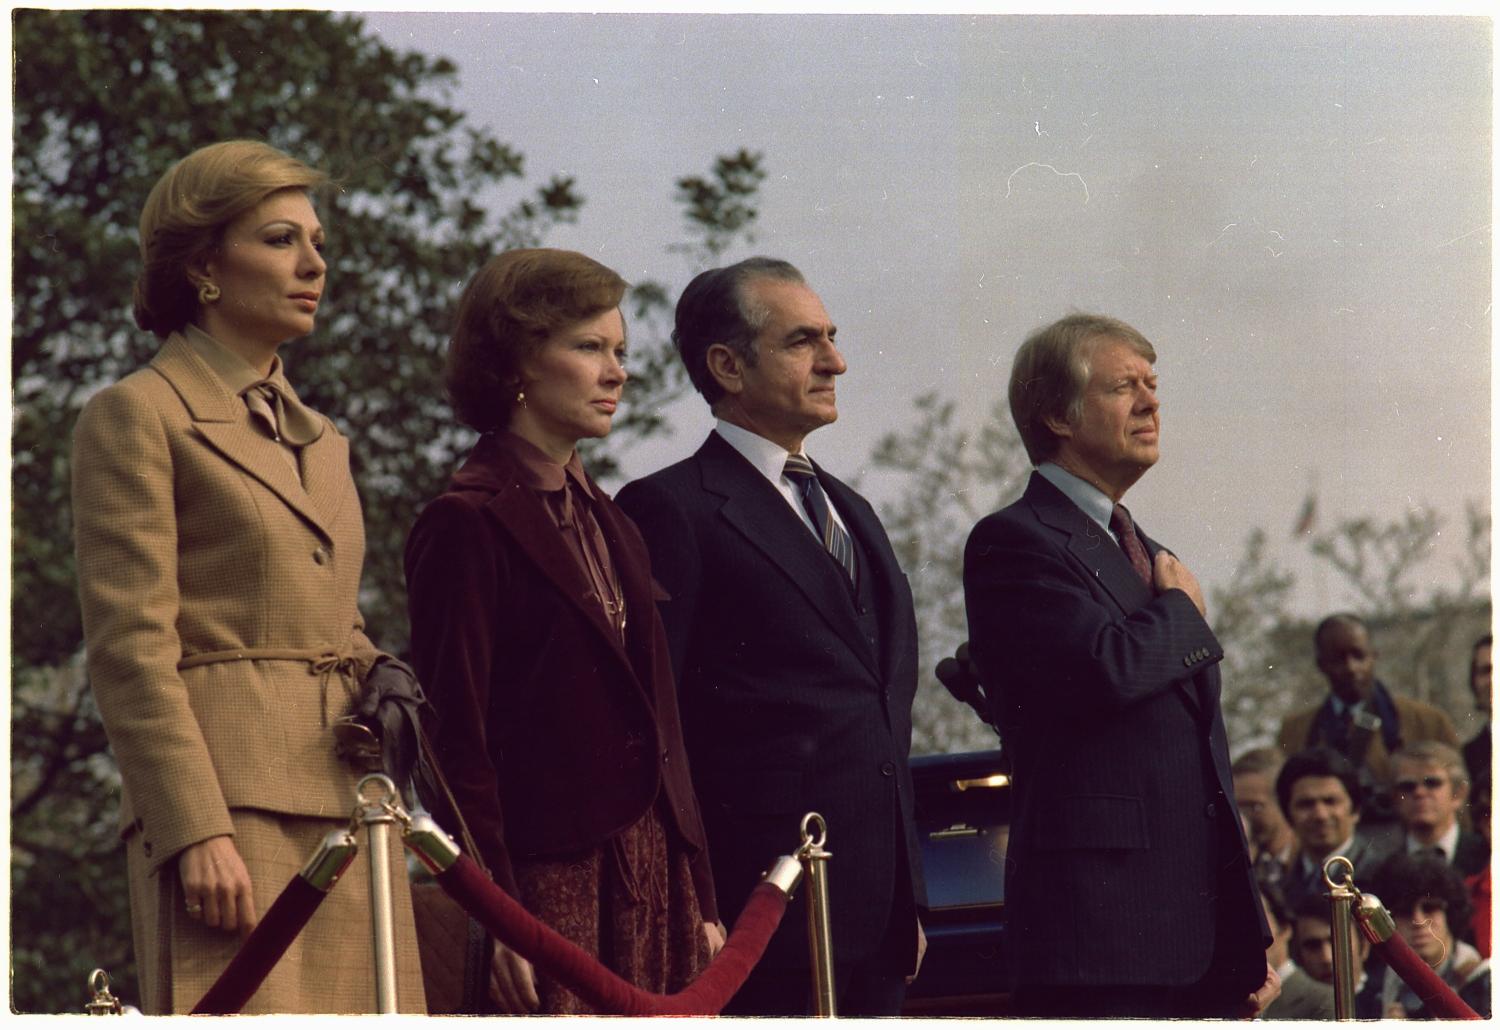 Rosalynn Carter and Jimmy Carter host welcoming ceremony for the state visit of the Shah of Iran and Shahbanou of Iran. Source: U.S. National Archives and Records Administration